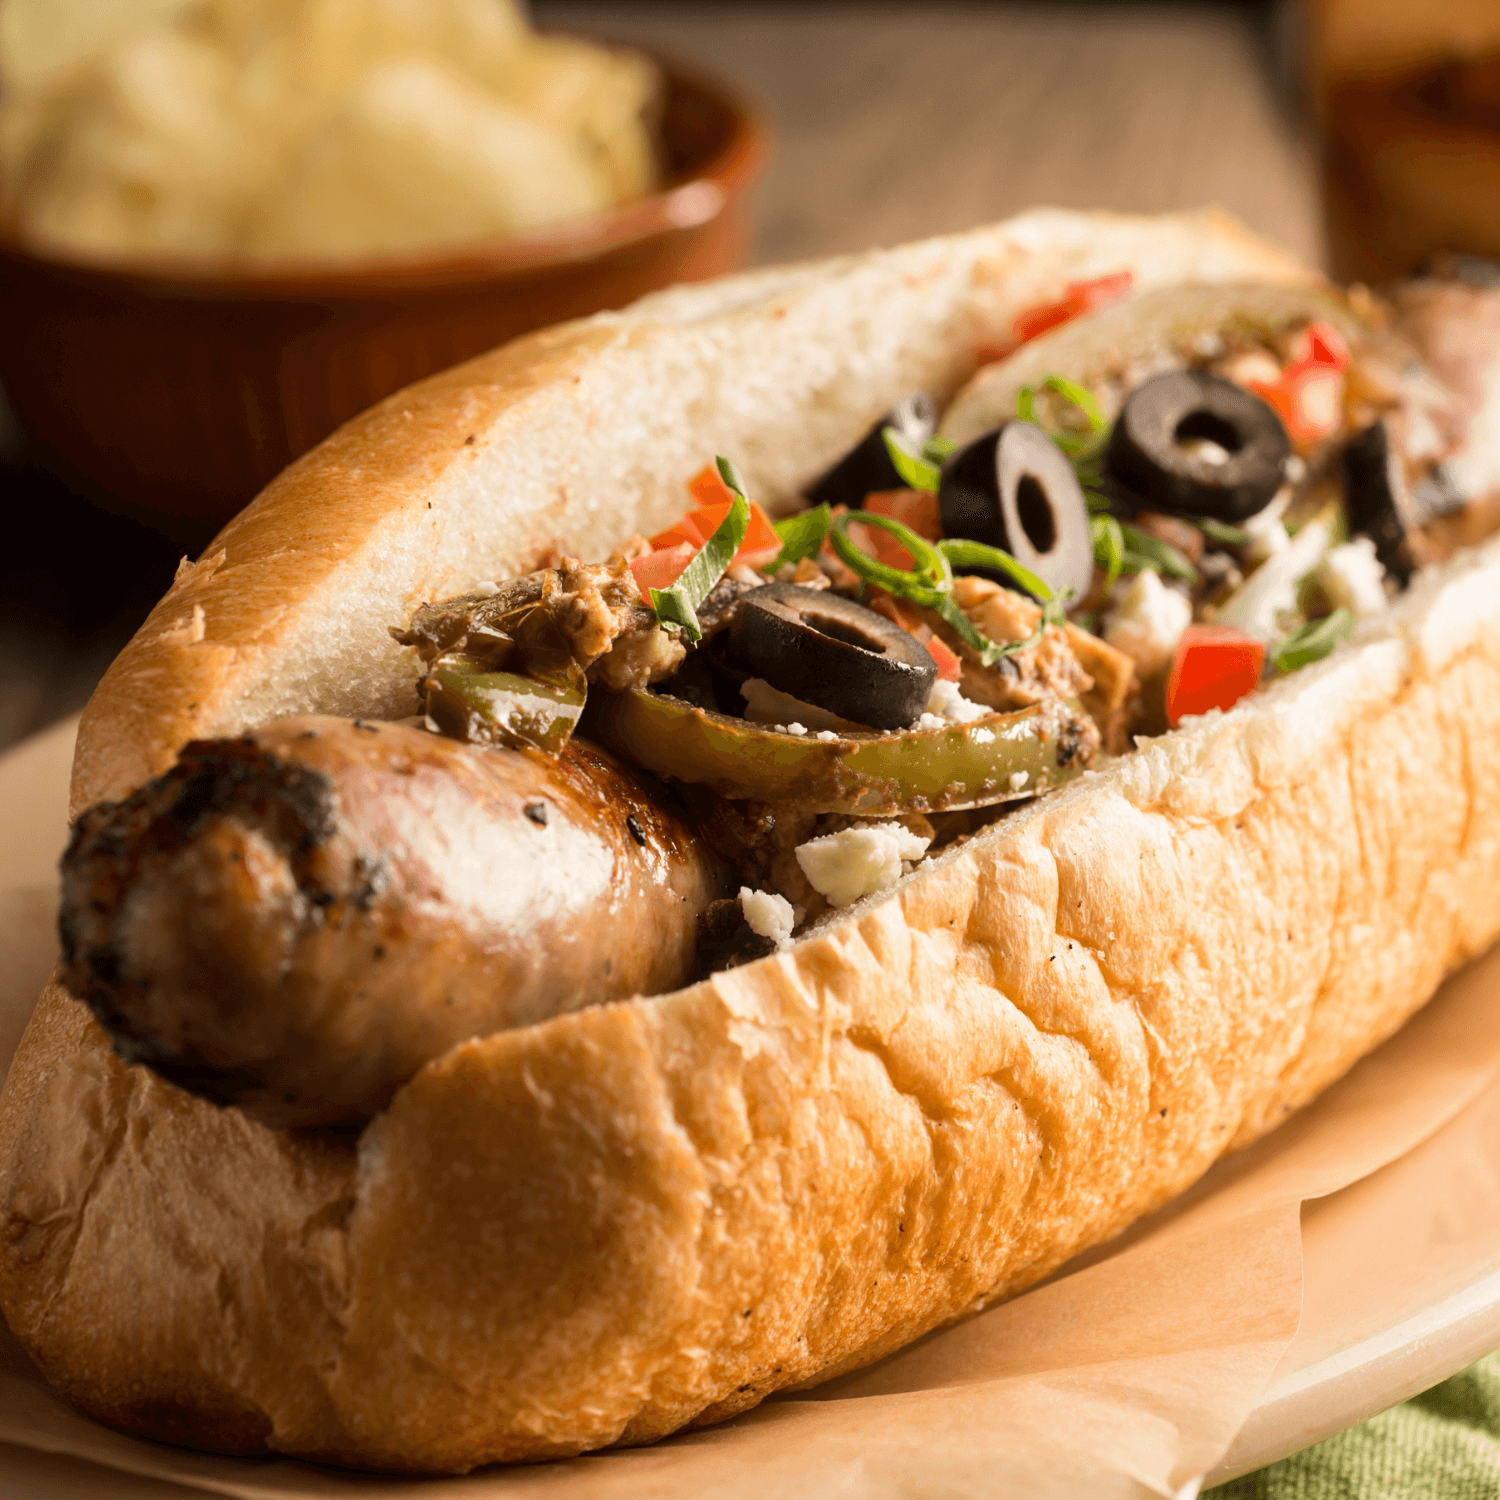 sausage with olives